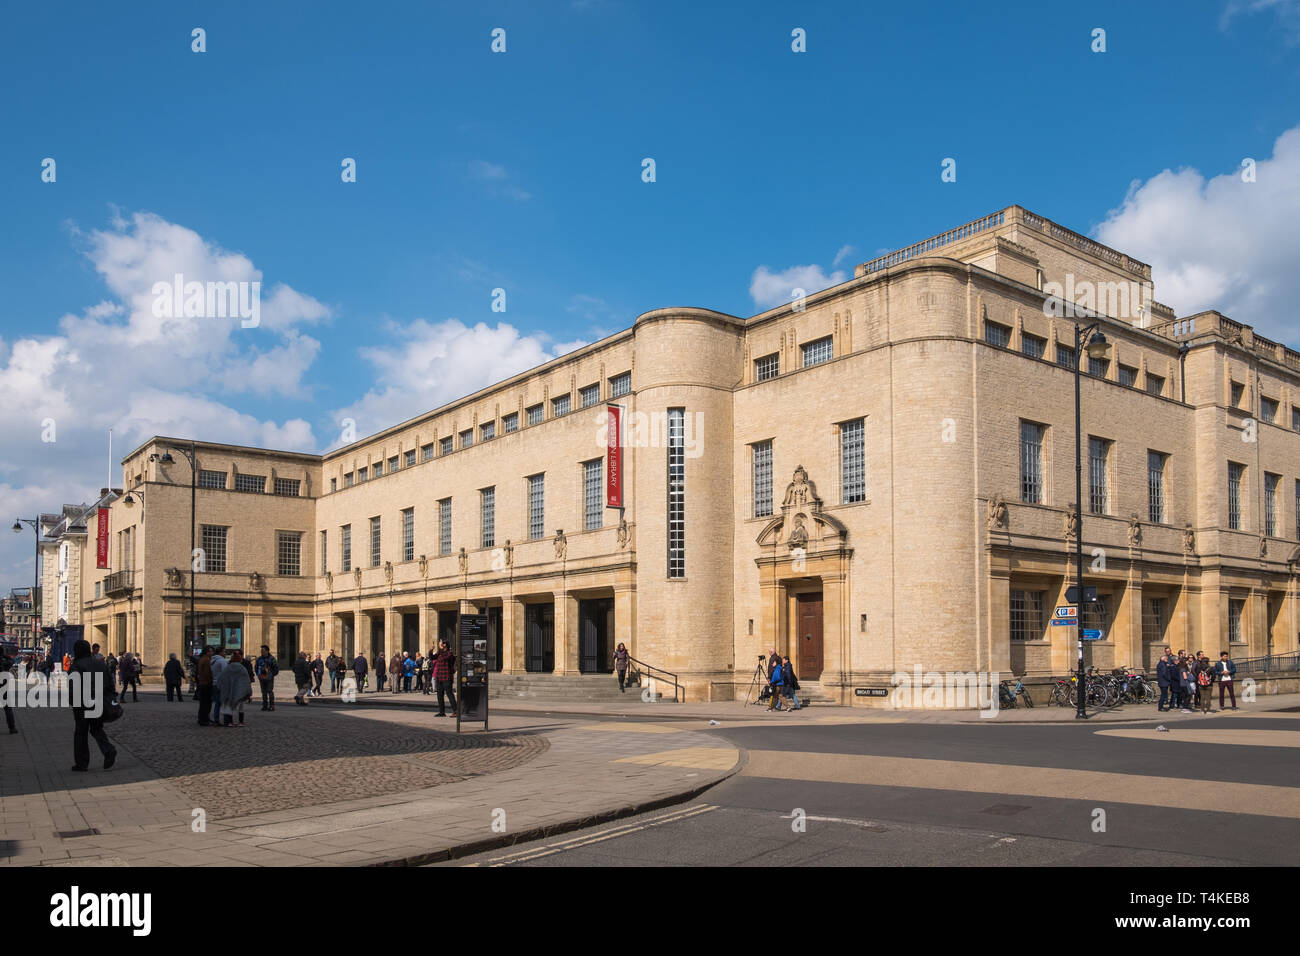 Weston Library in Broad Street, Oxford, UK Stock Photo